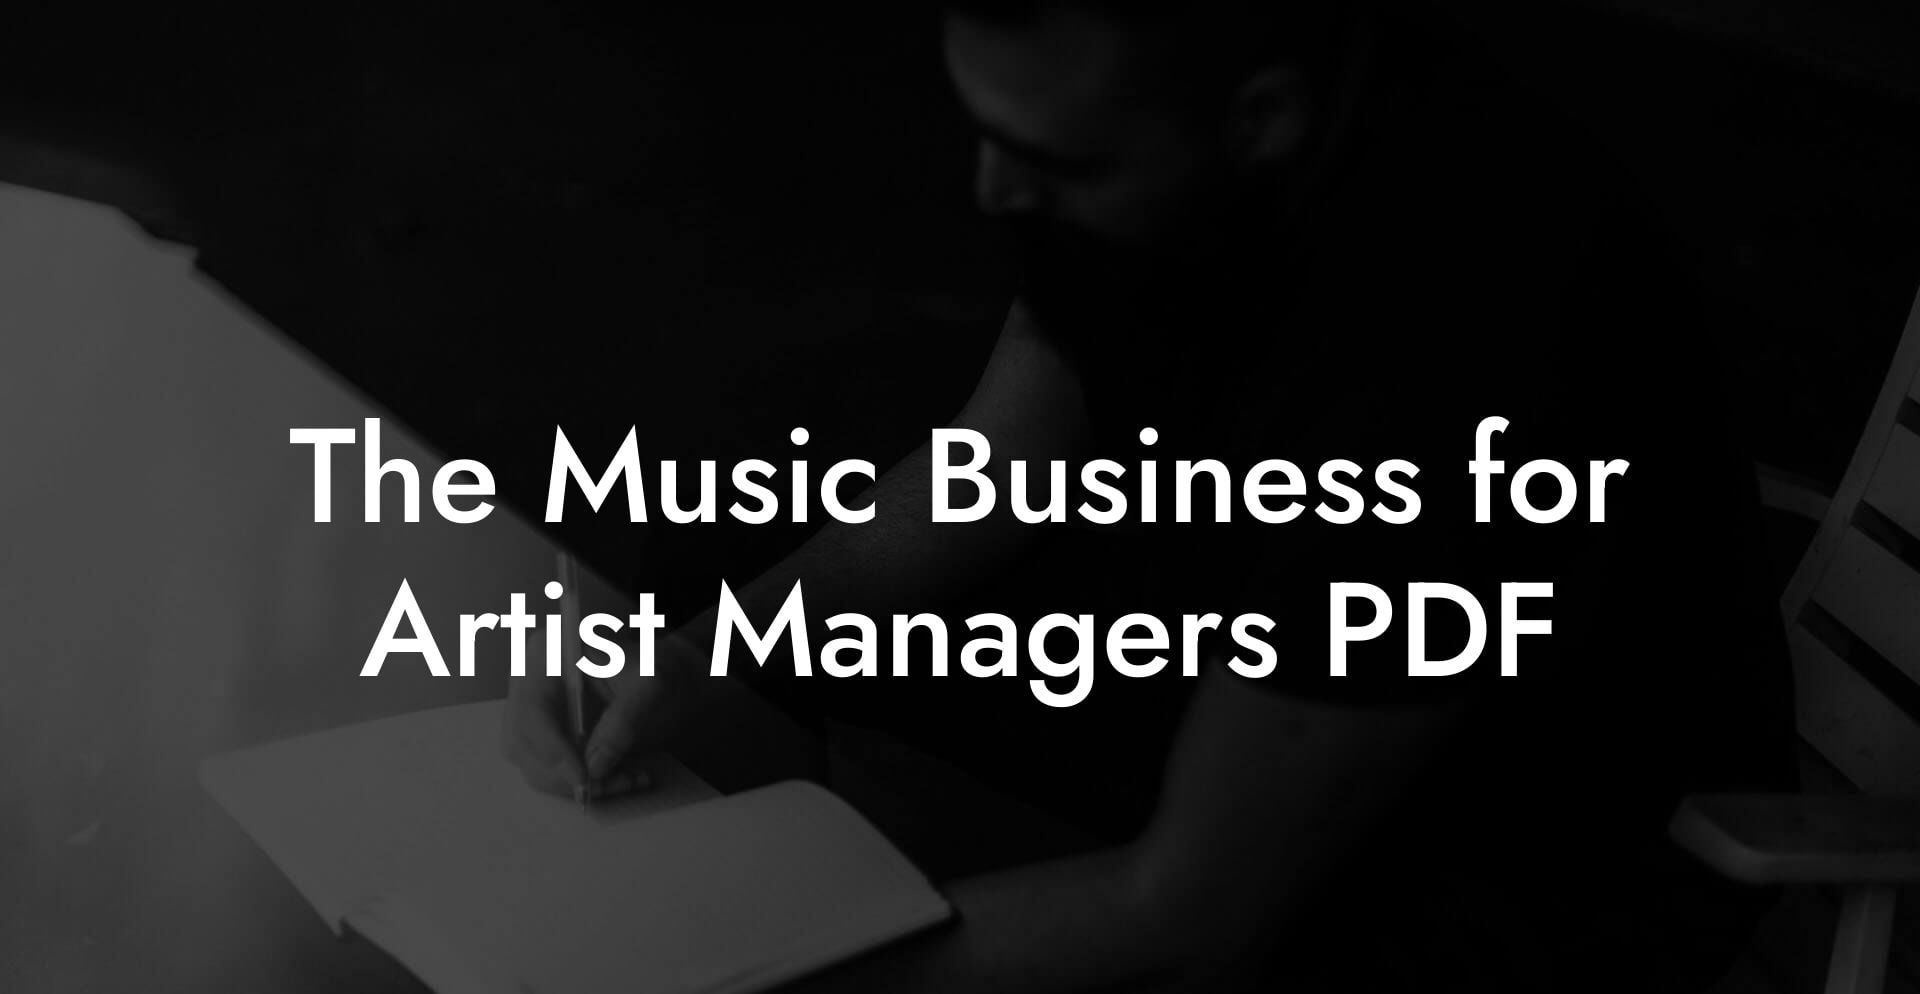 The Music Business for Artist Managers PDF